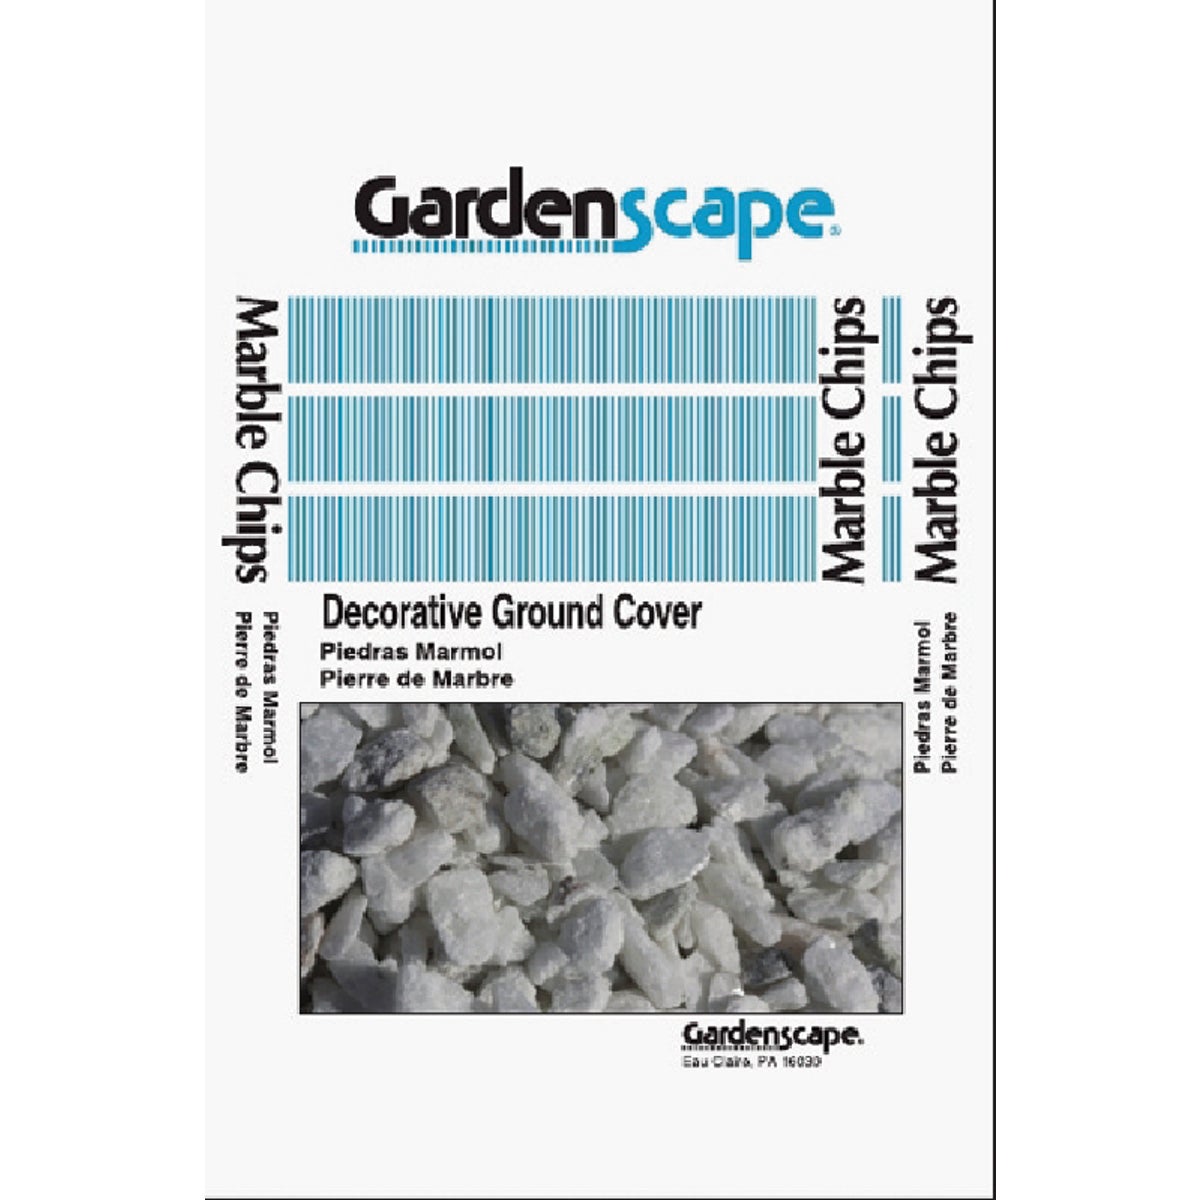 Item 702981, 3/4 In. to 1-3/4 In. white marble rock landscape chips.